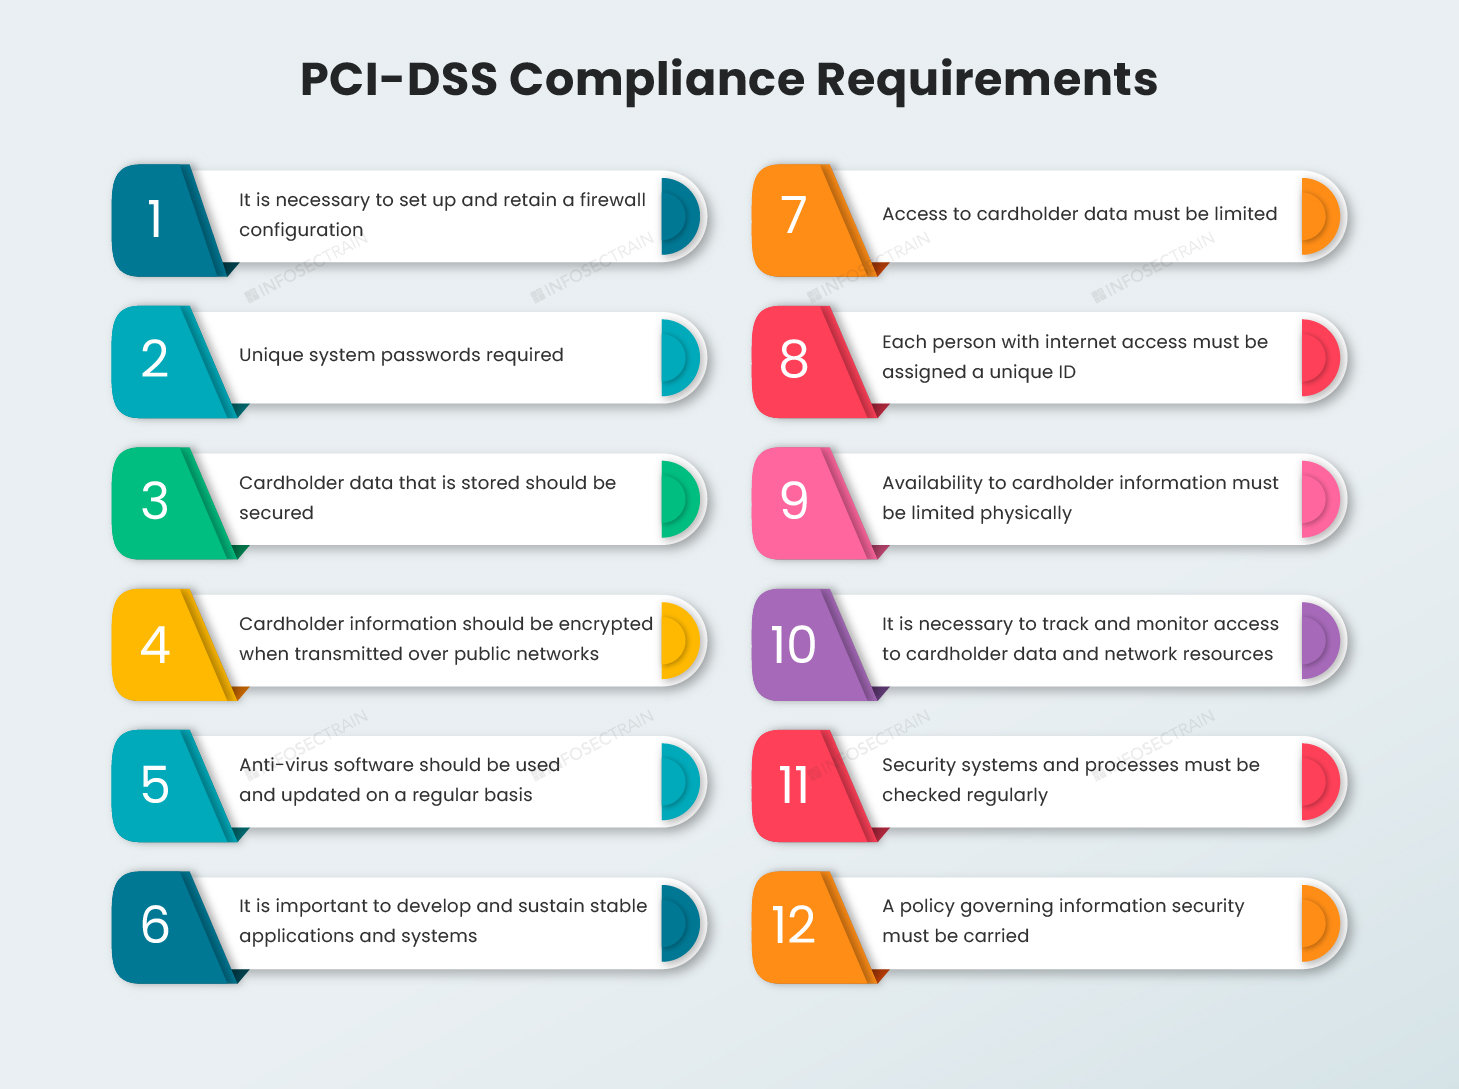 PCI-DSS Compliance Requirements